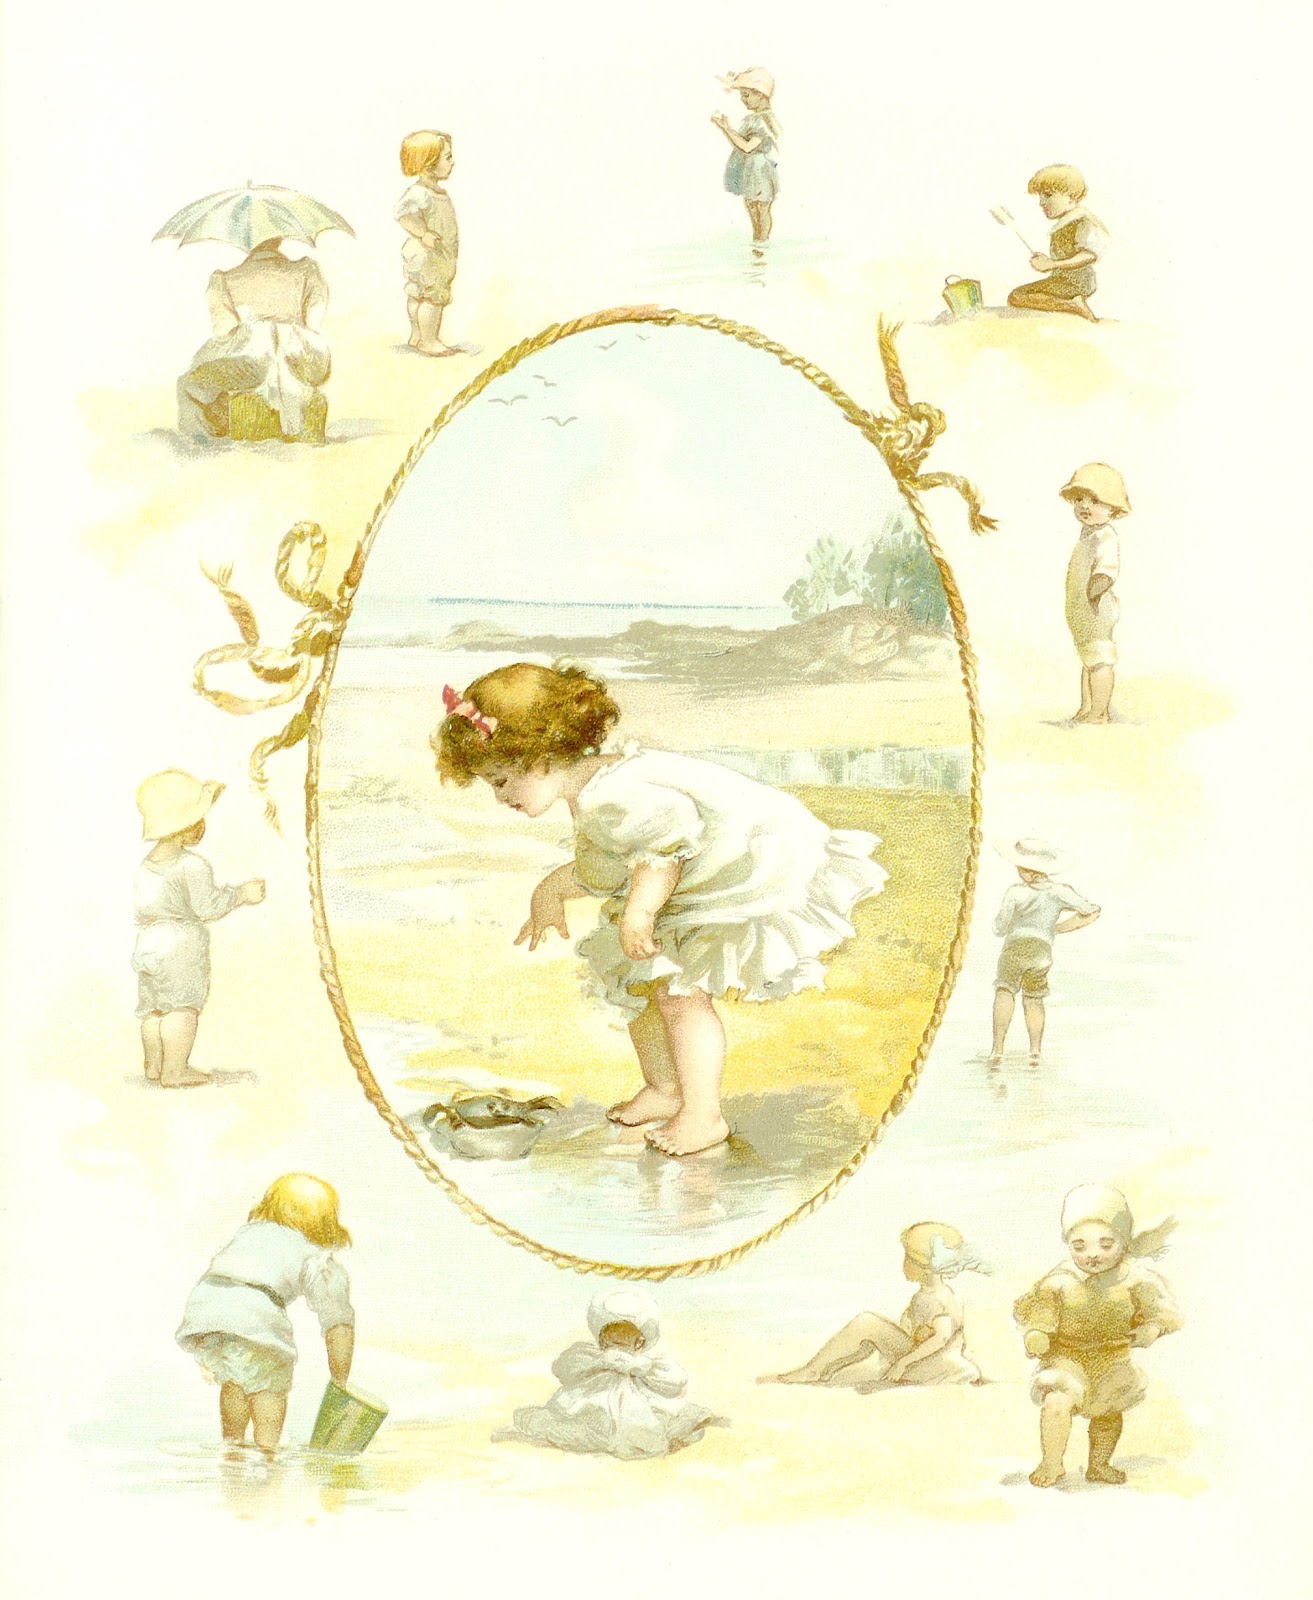     Vintage Baby Clip Art  Seaside Beach Frame Theme From Vintage Baby